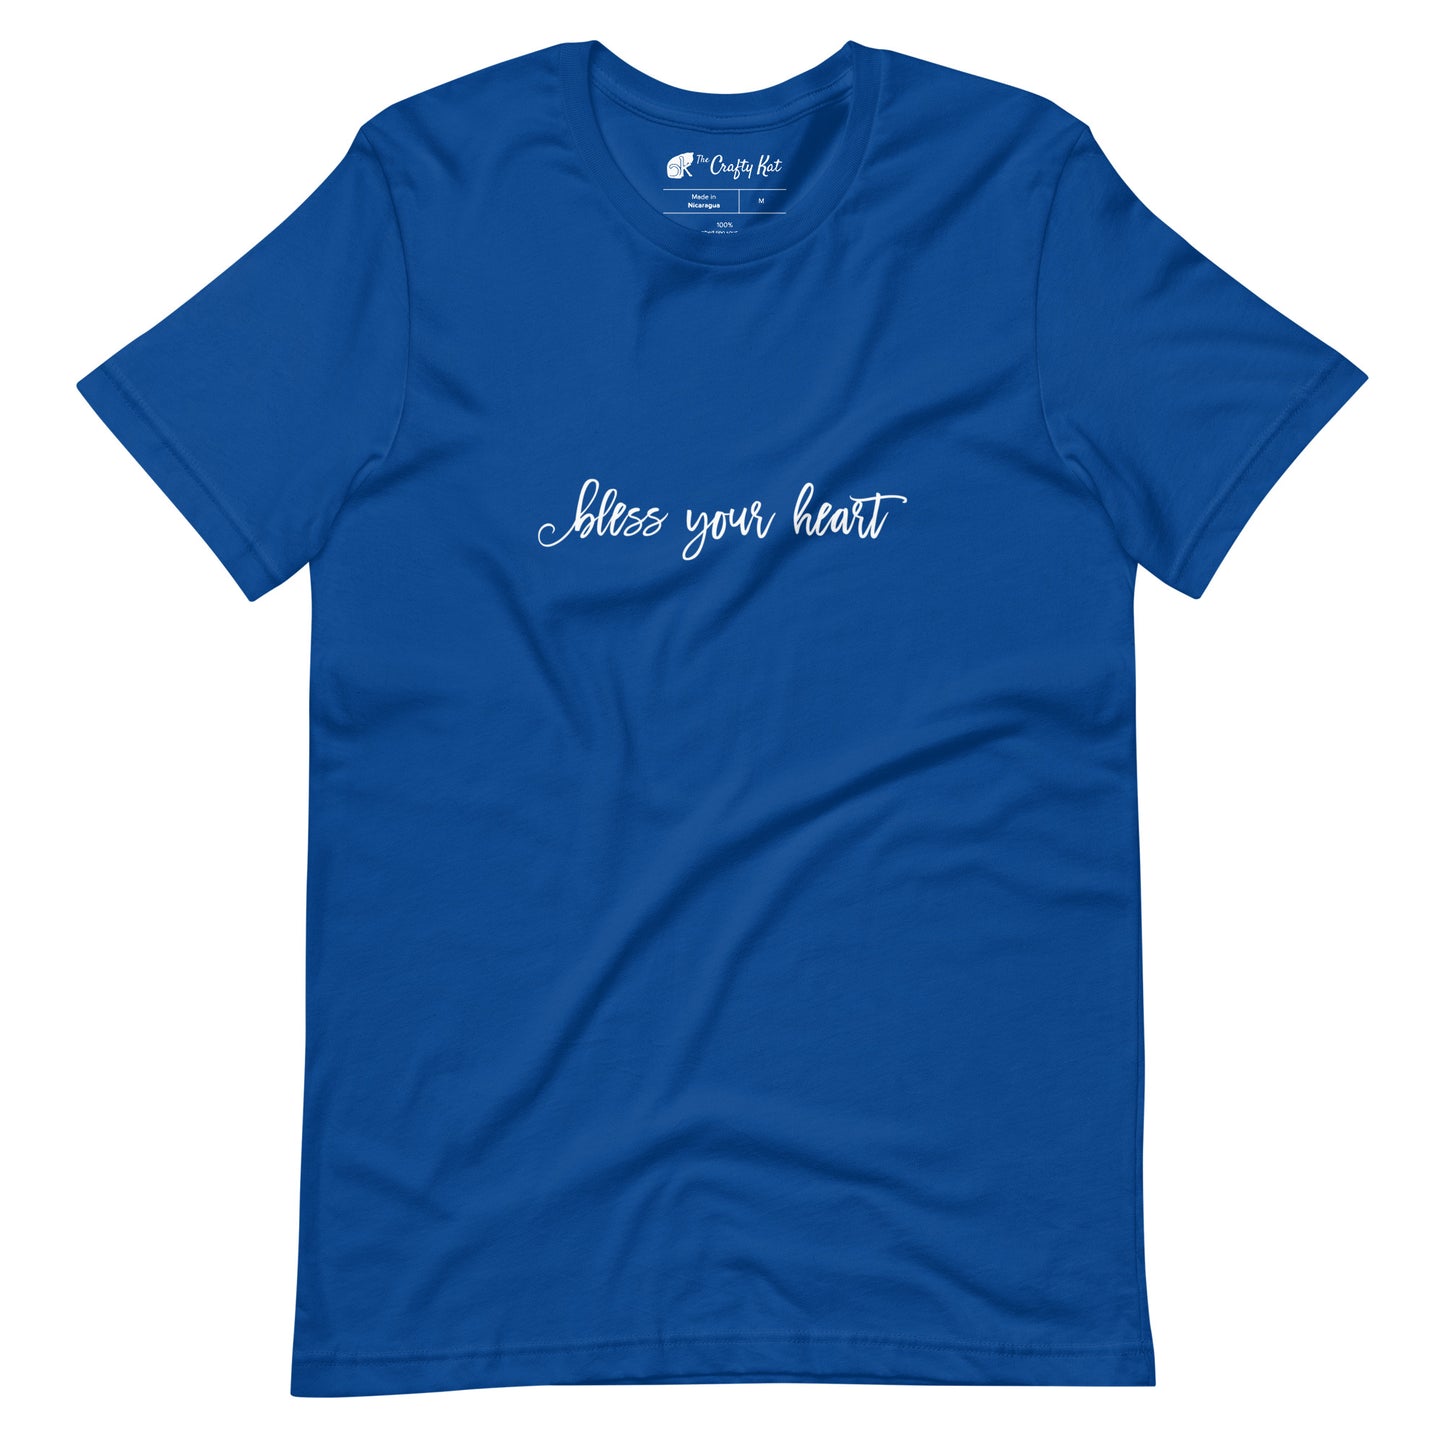 True Royal blue t-shirt with white graphic in an excessively twee font: "bless your heart"